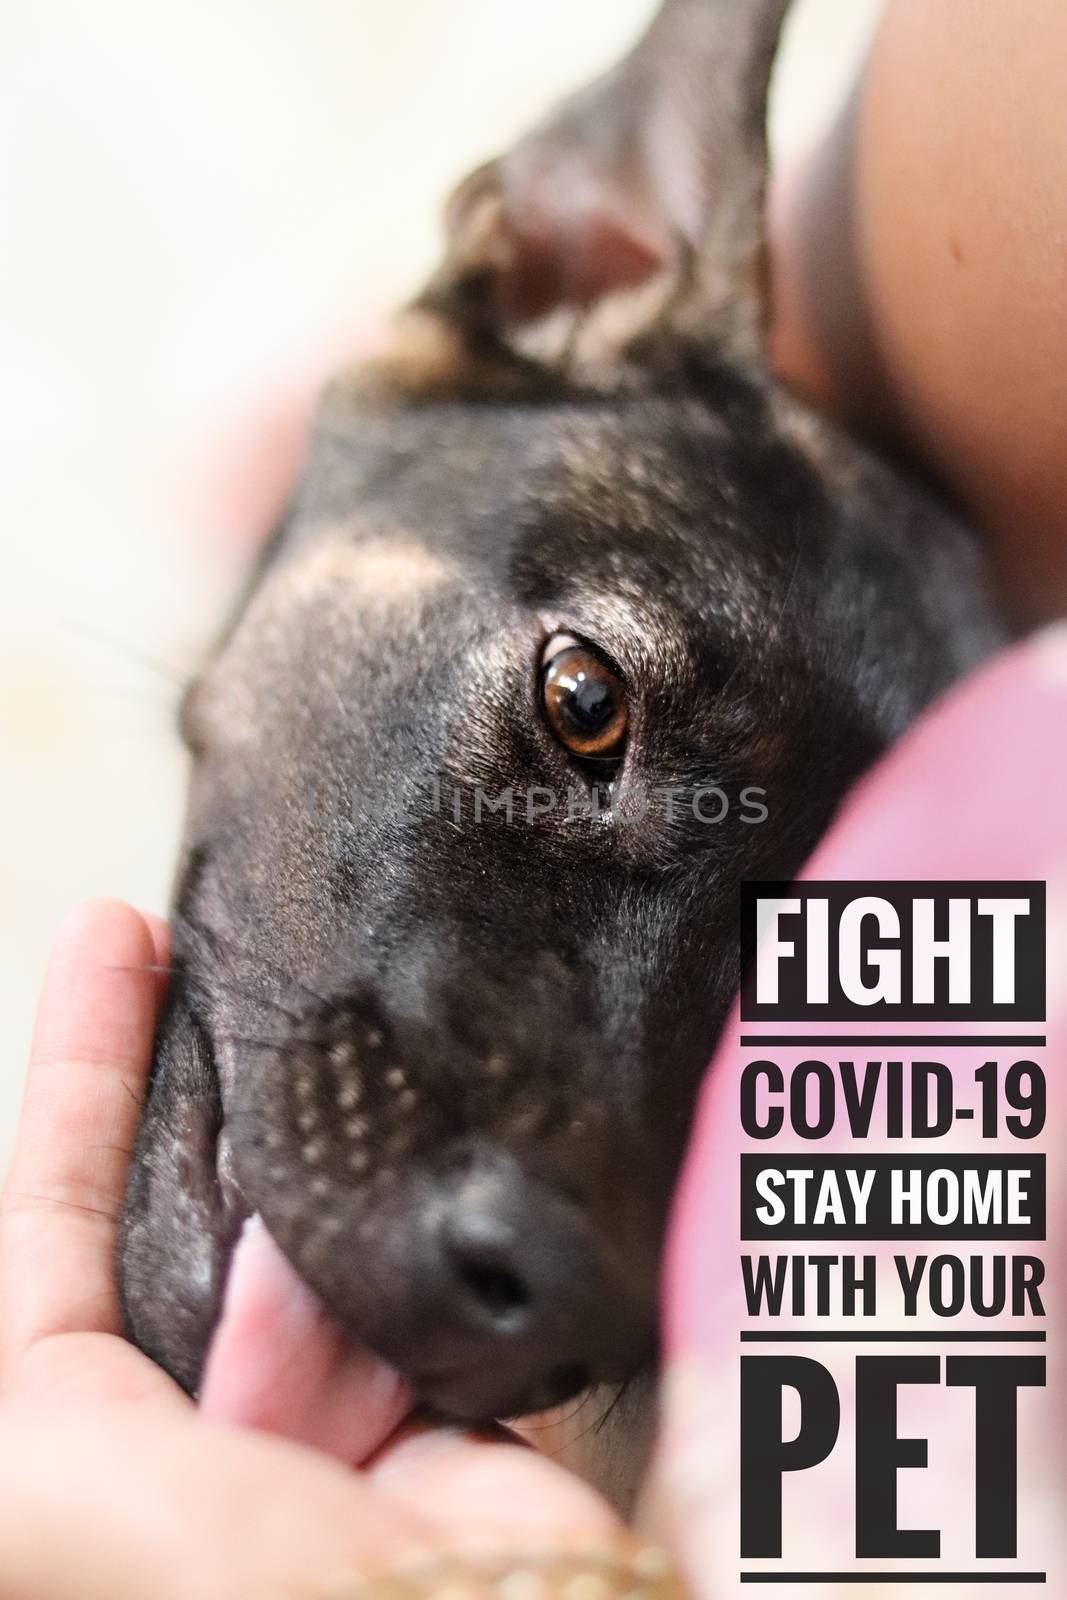 Close up of a dog licking its owner's hand along with a message that says Fight Covid-19 and stay home with your pet